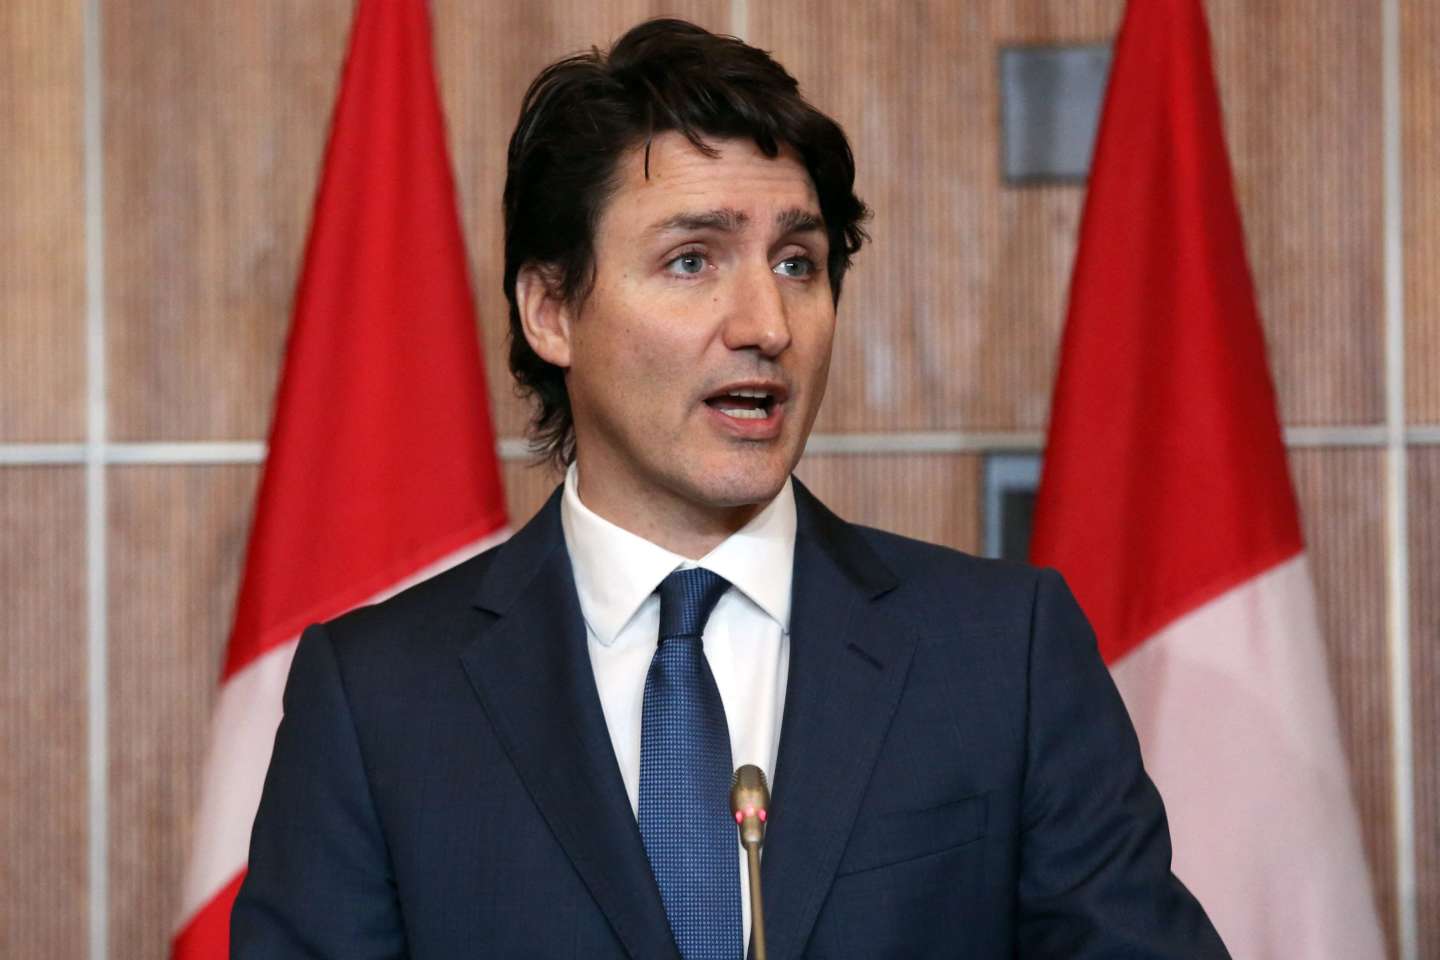 Defence Cover Canadian airspace shoots down an Unidentified object Justin Trudeau